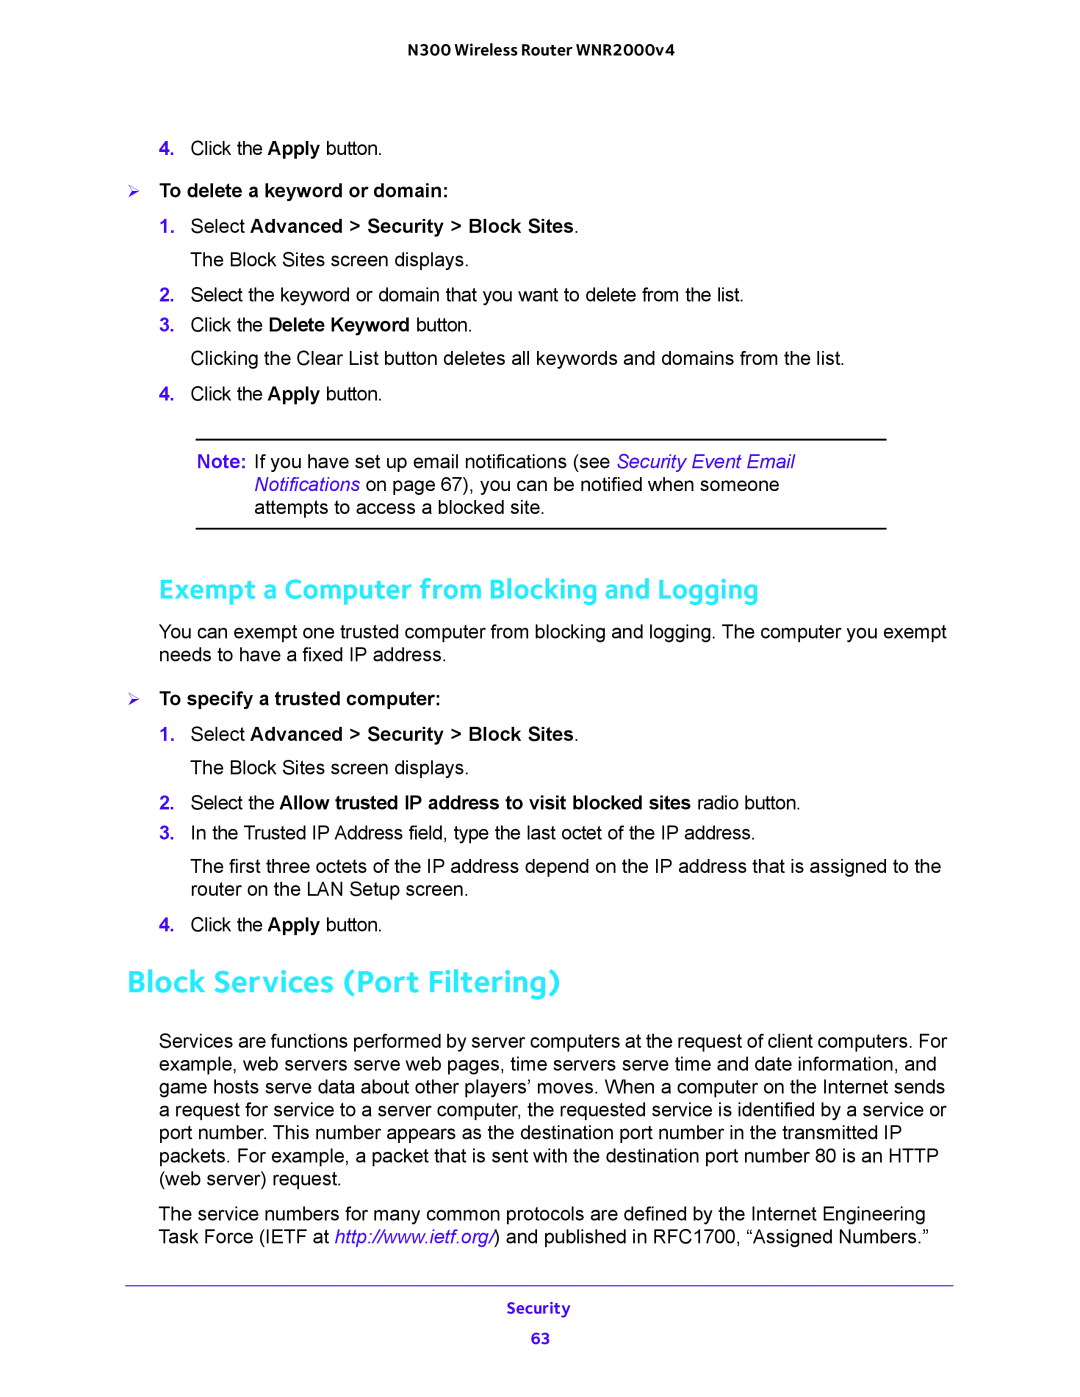 NETGEAR WNR200v4 user manual Block Services Port Filtering, Exempt a Computer from Blocking and Logging 